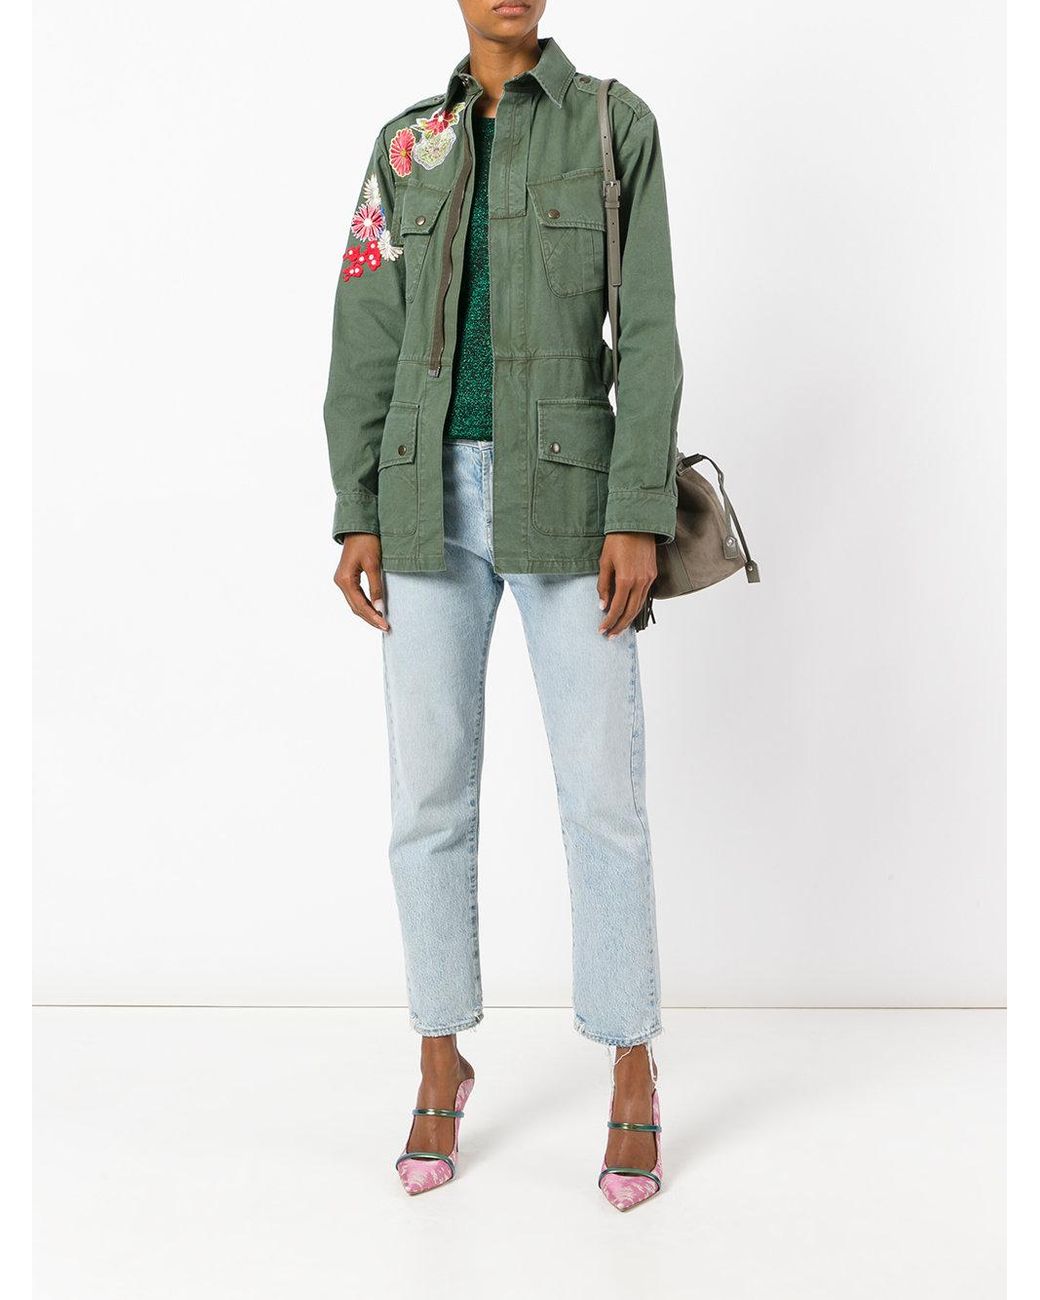 Saint Laurent Flower Embroidered Military Parka Jacket in Green | Lyst  Canada